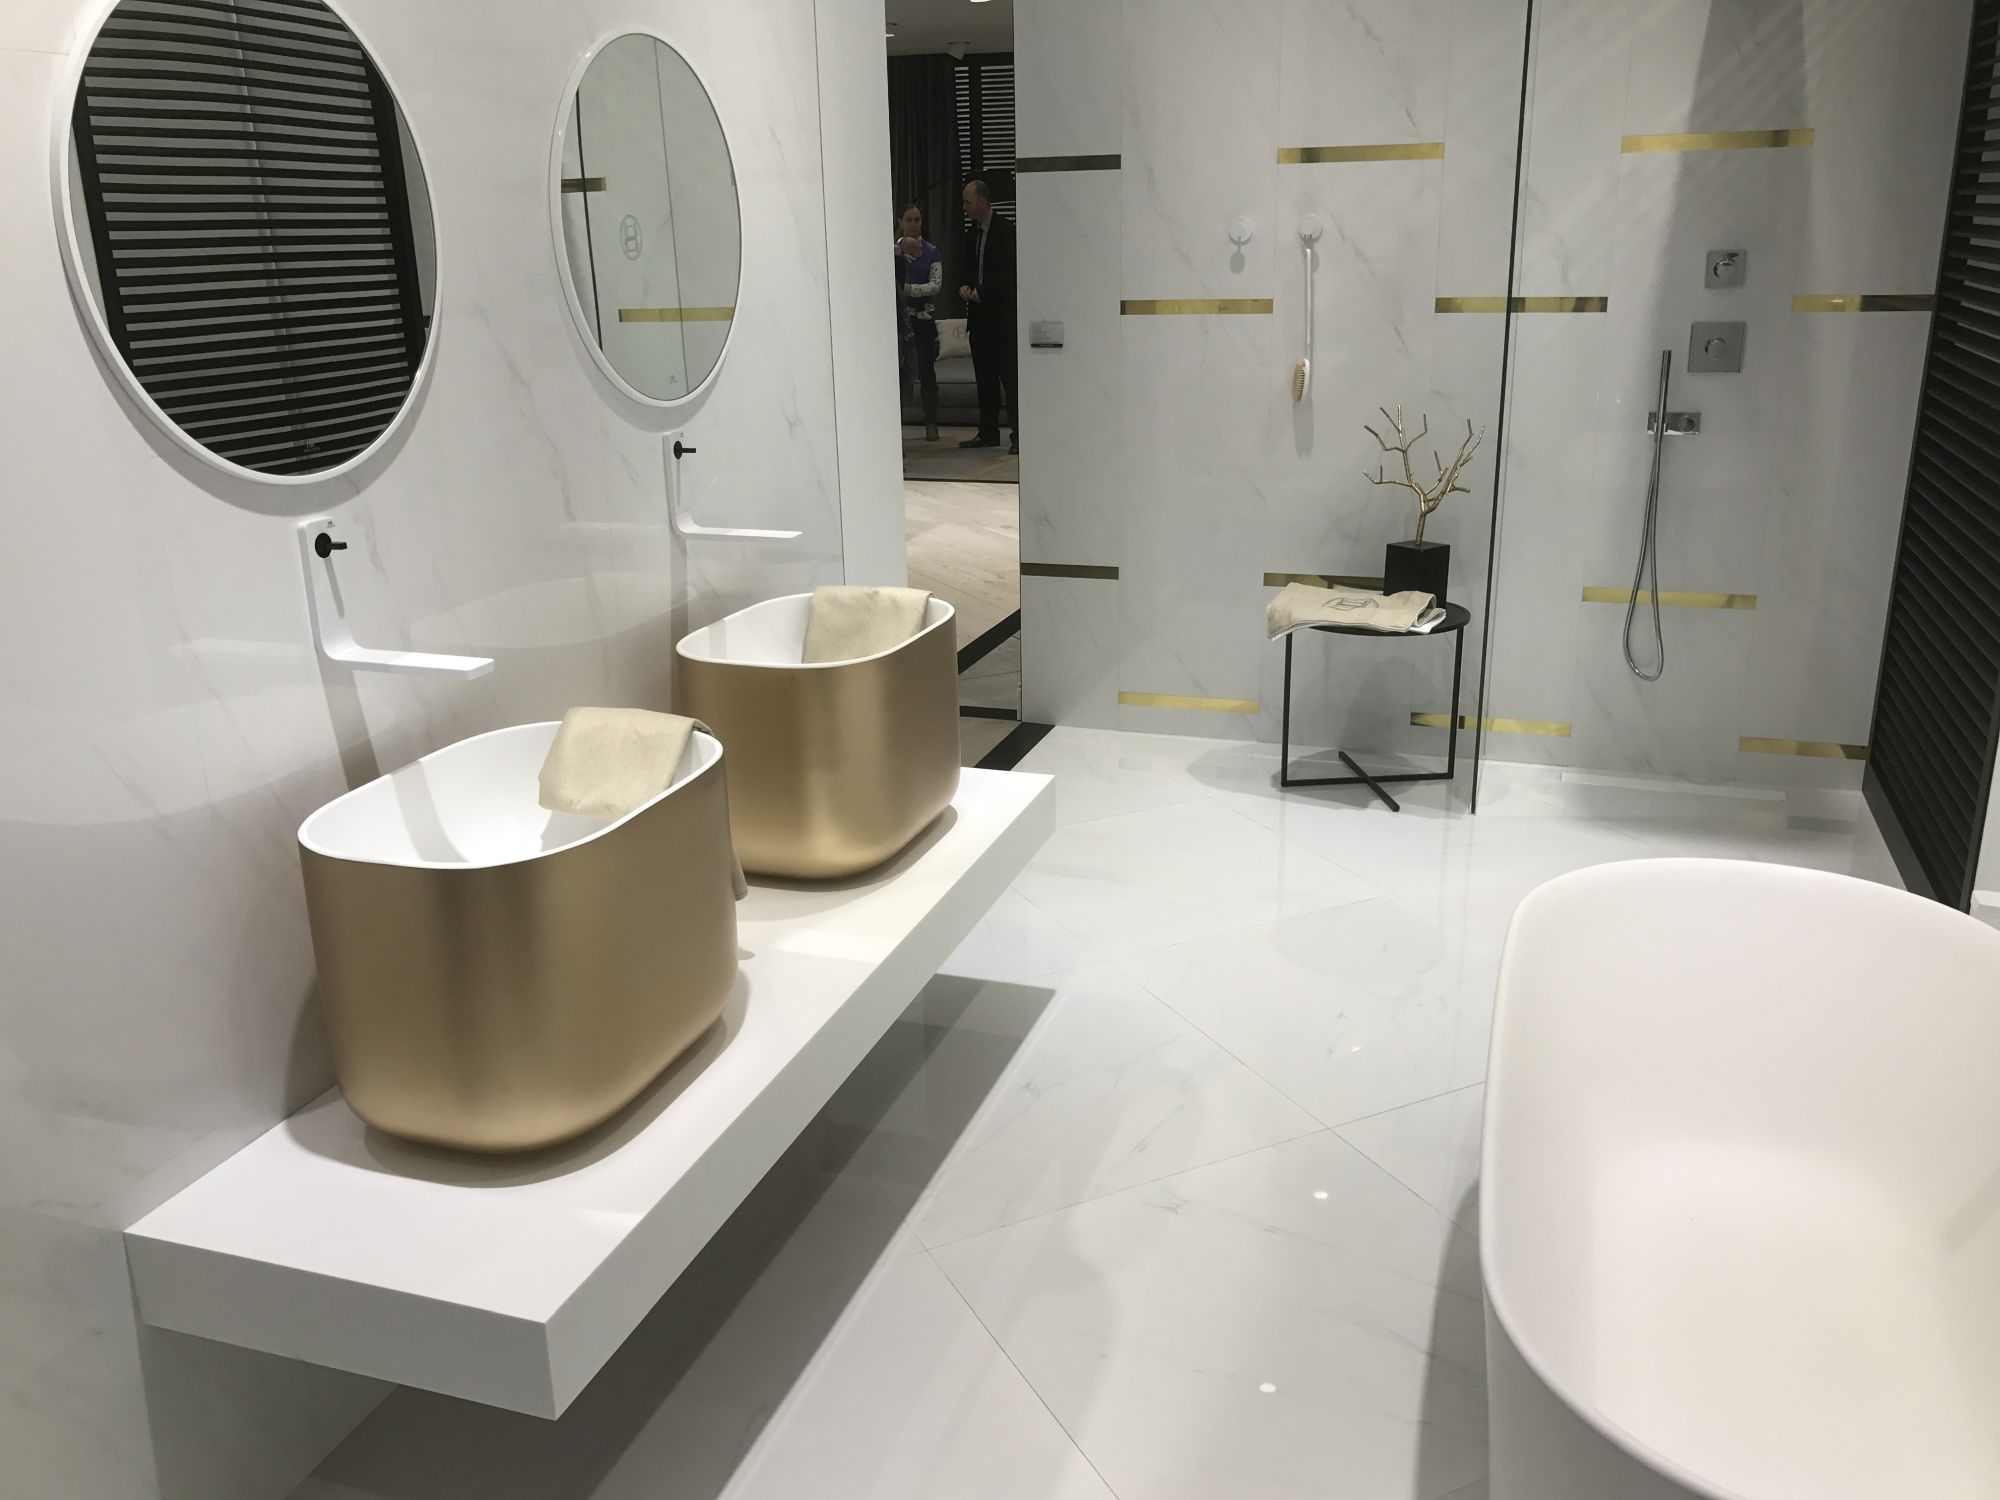 Marble inspired floor and wall tiles in modern bathroom by Porcelanosa